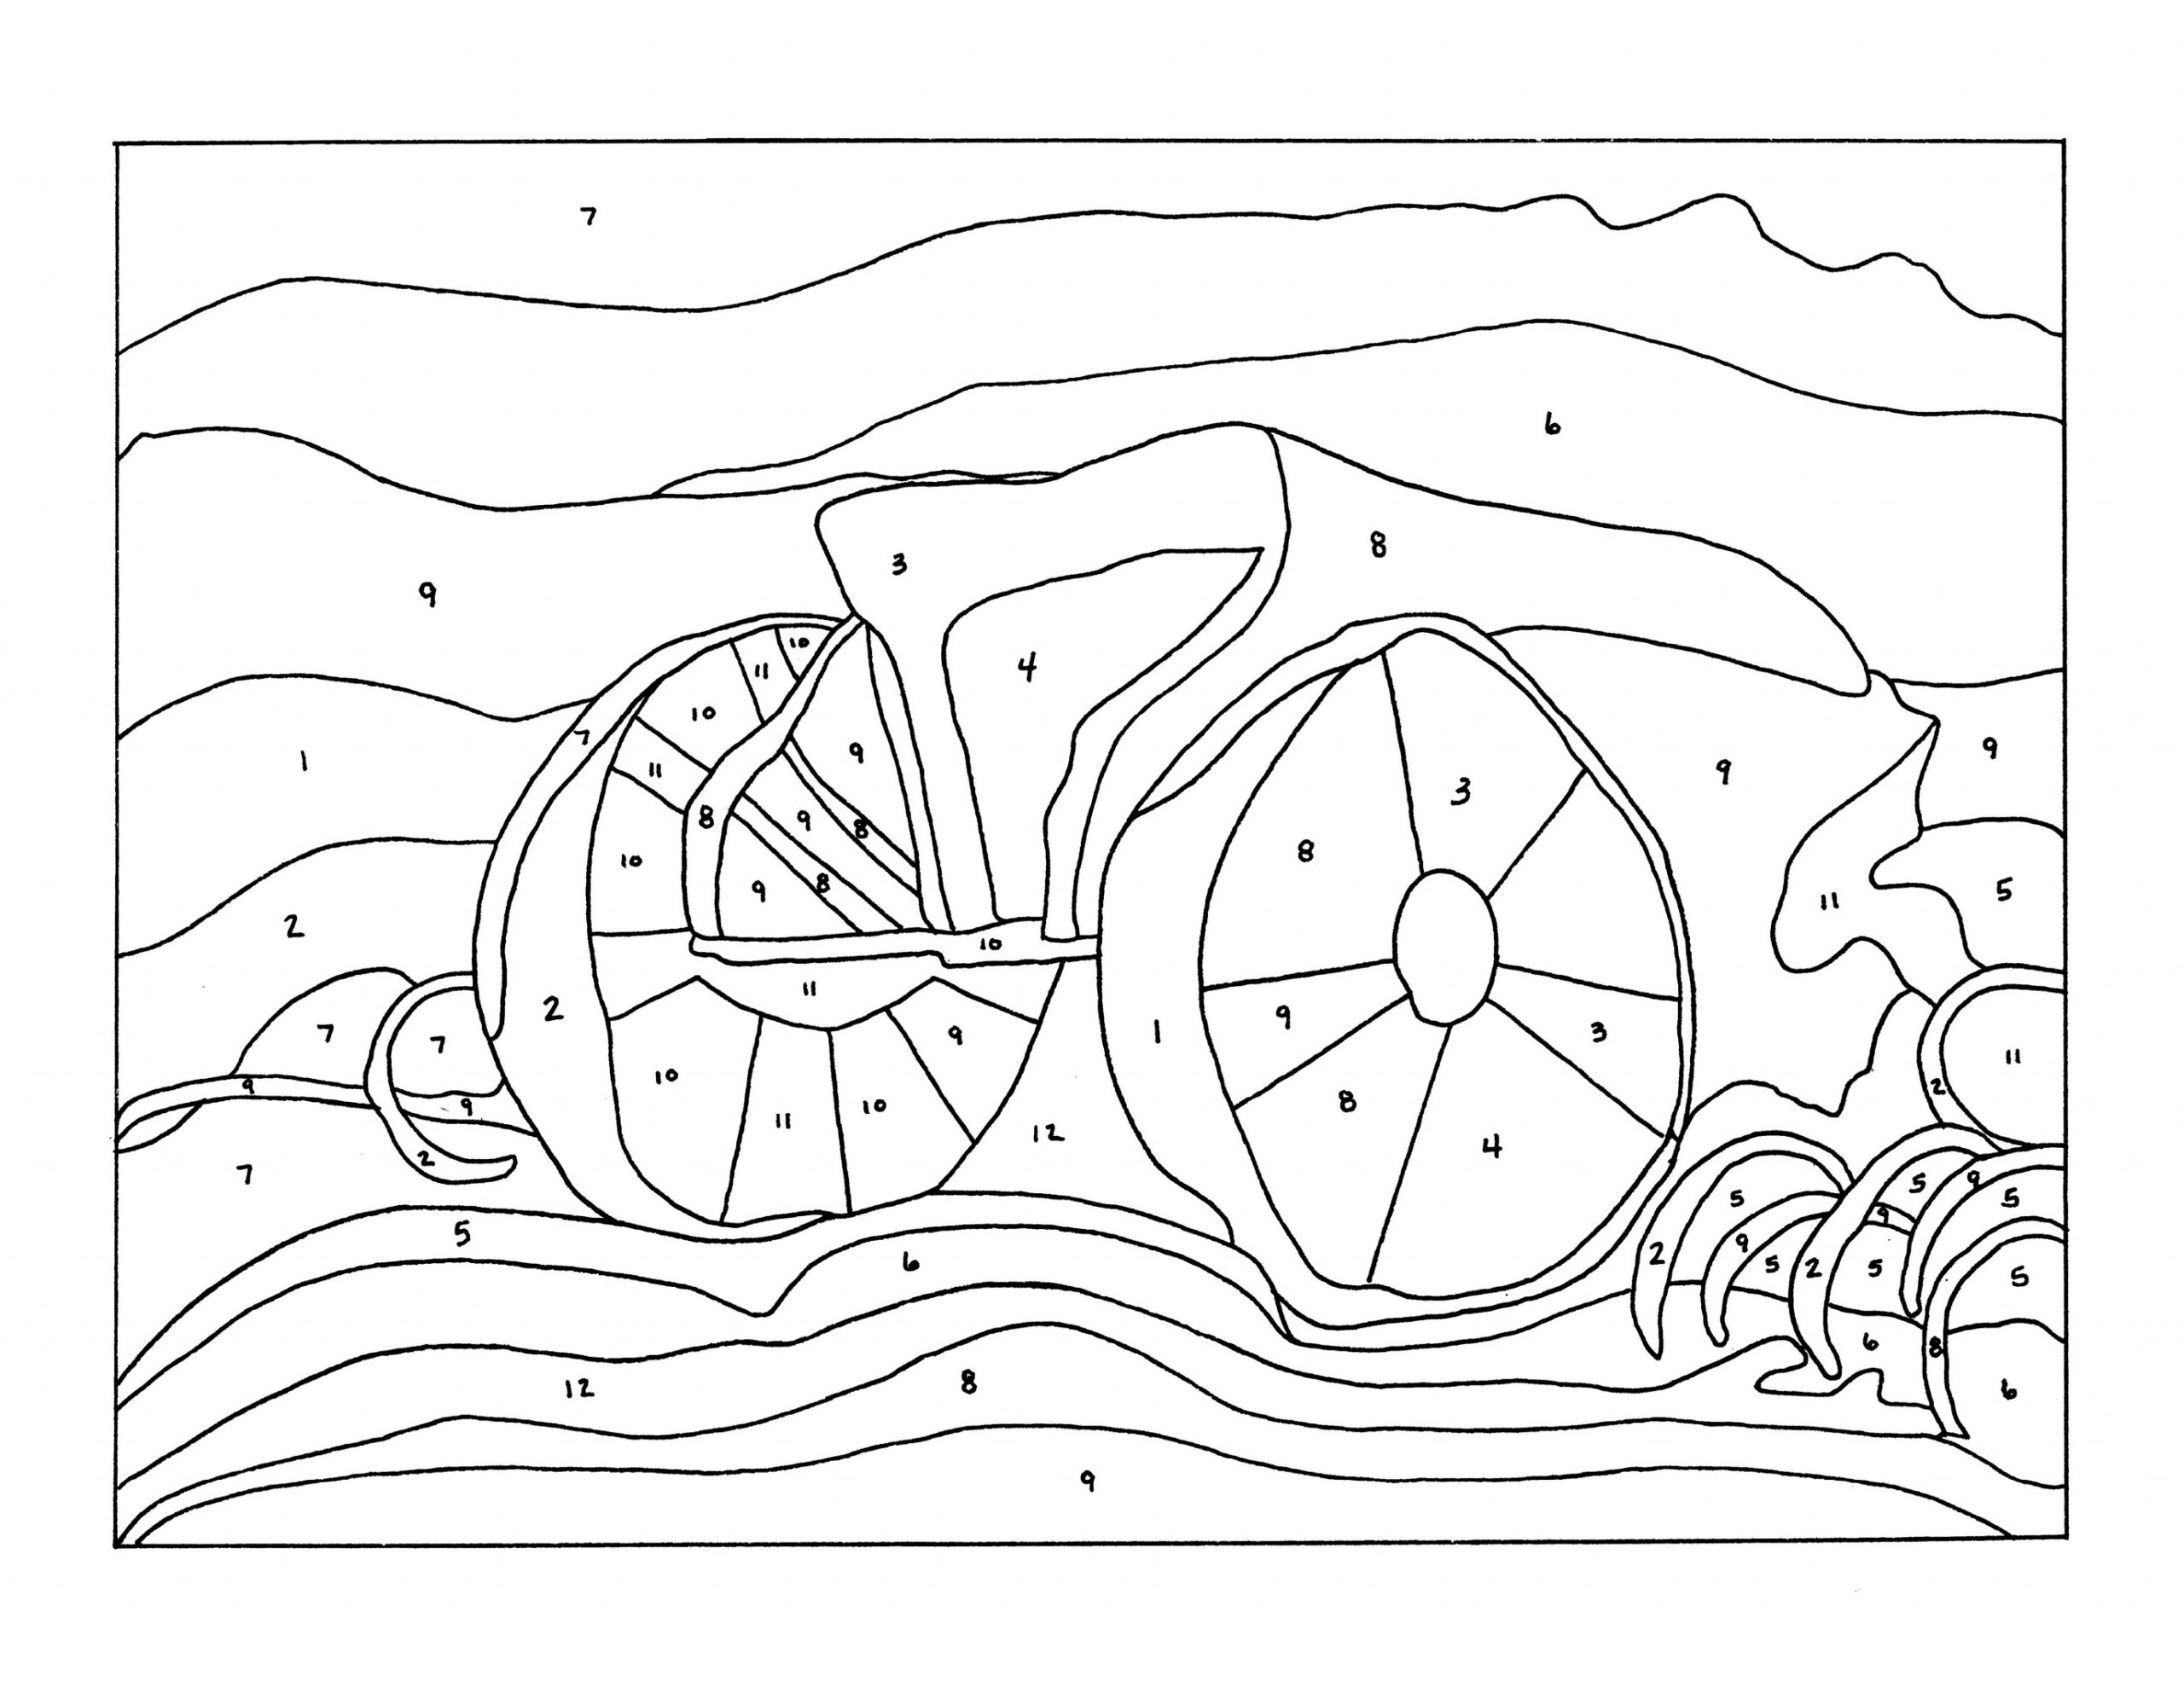 Coloring pages charles h macnider art museum